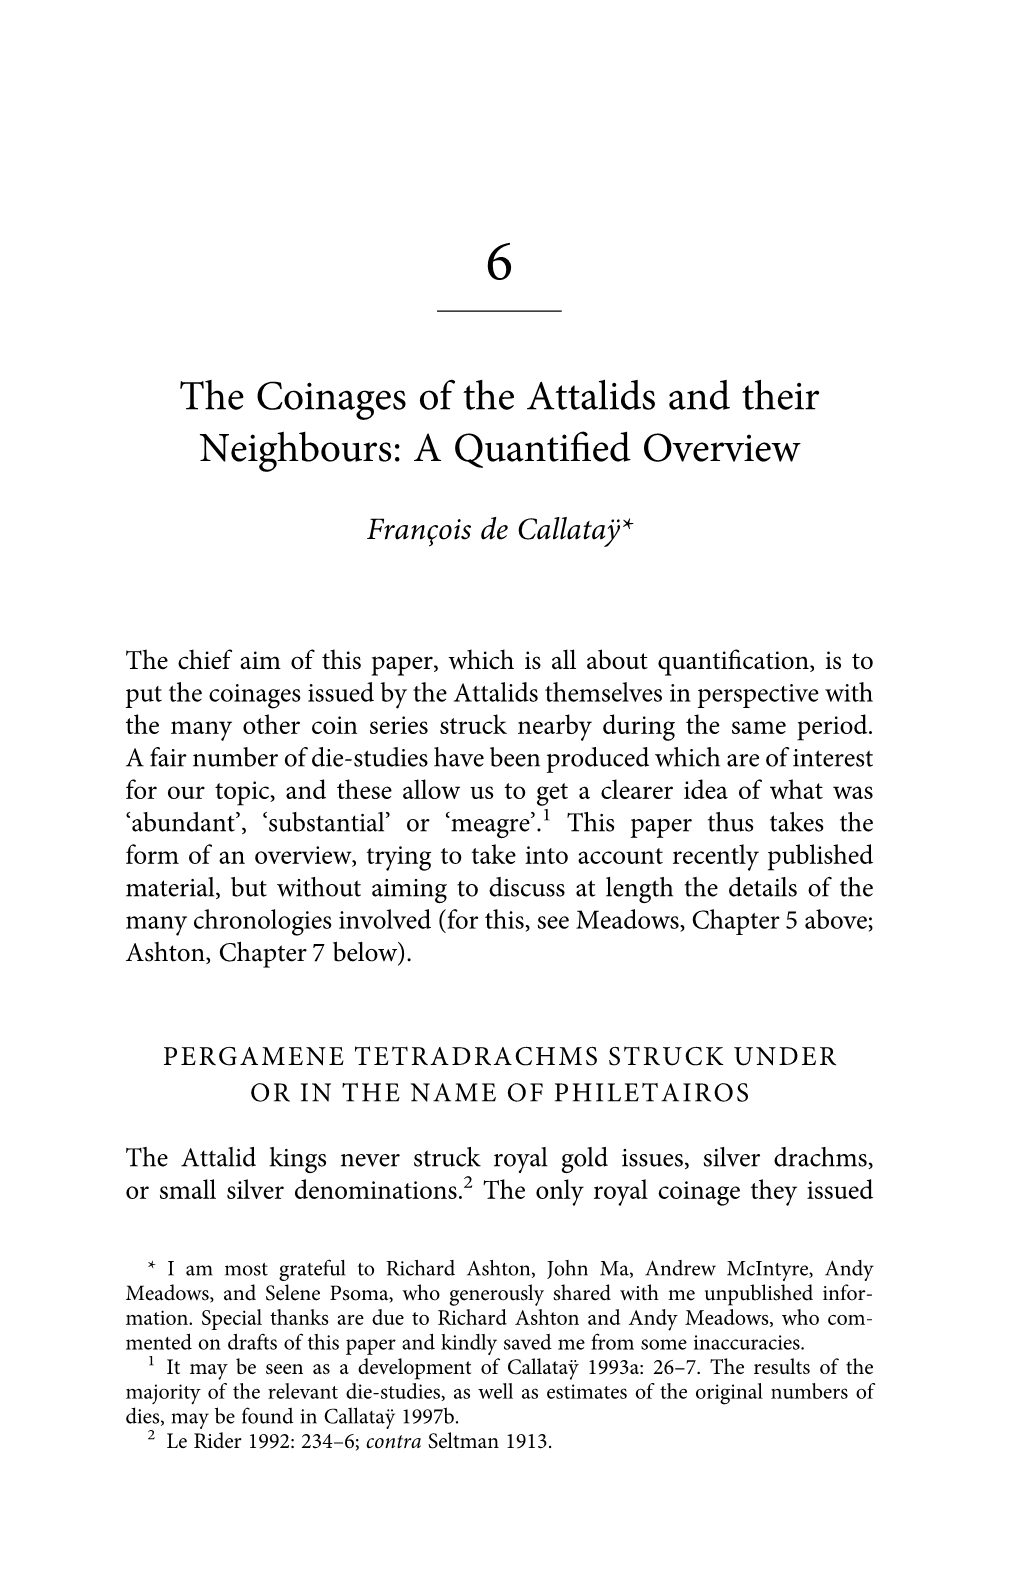 The Coinages of the Attalids and Their Neighbours: a Quantified Overview